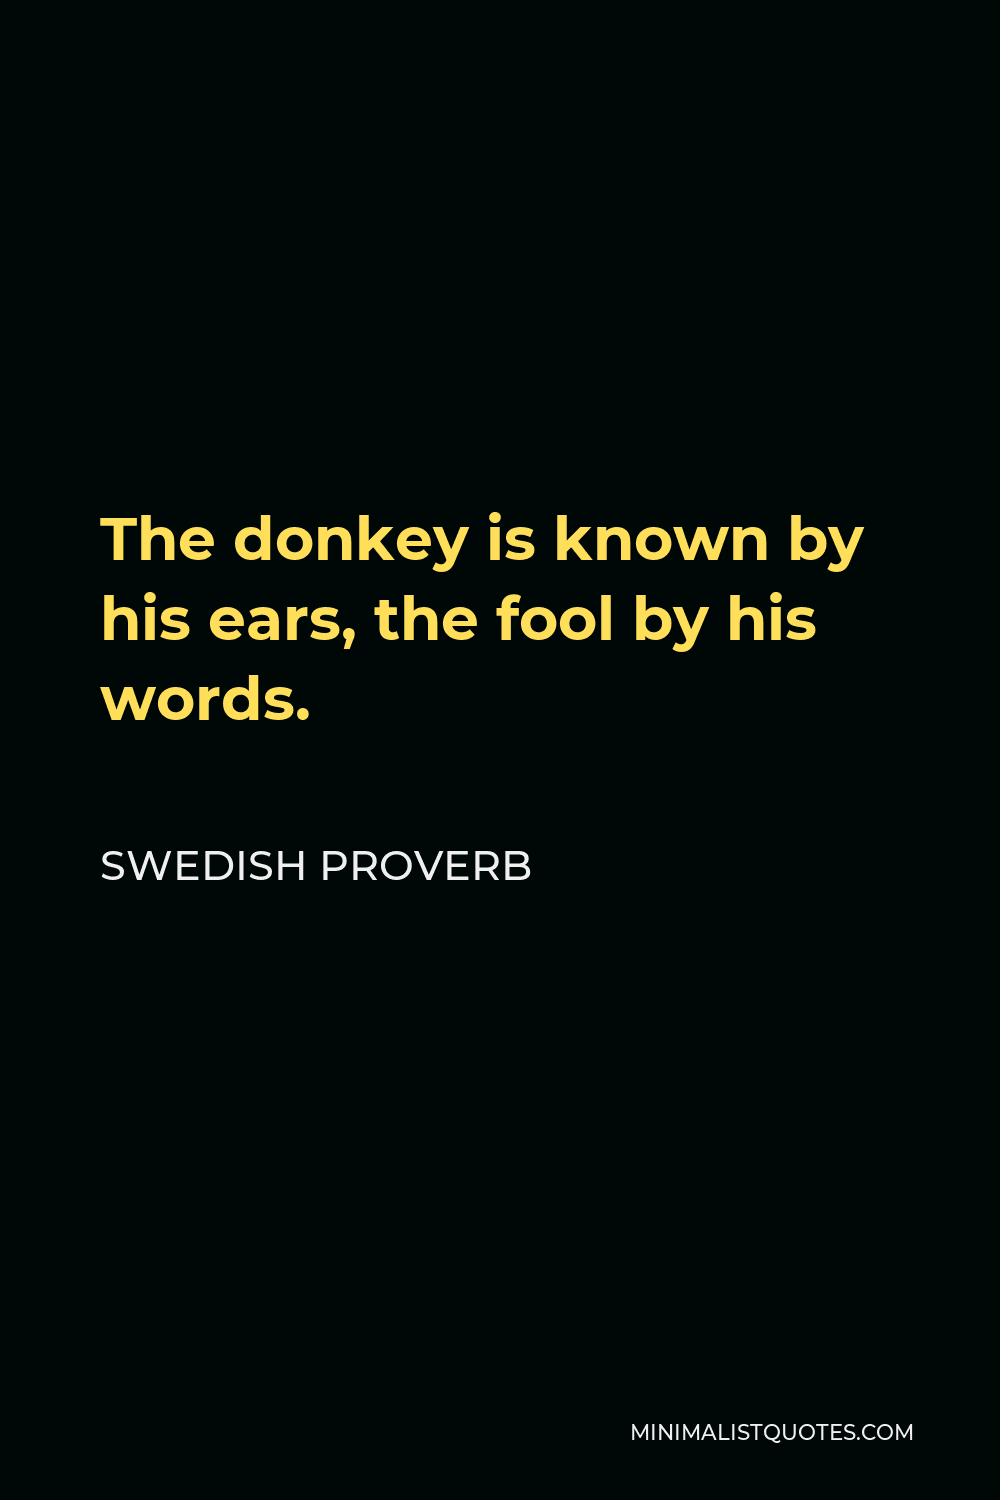 Swedish Proverb Quote - The donkey is known by his ears, the fool by his words.